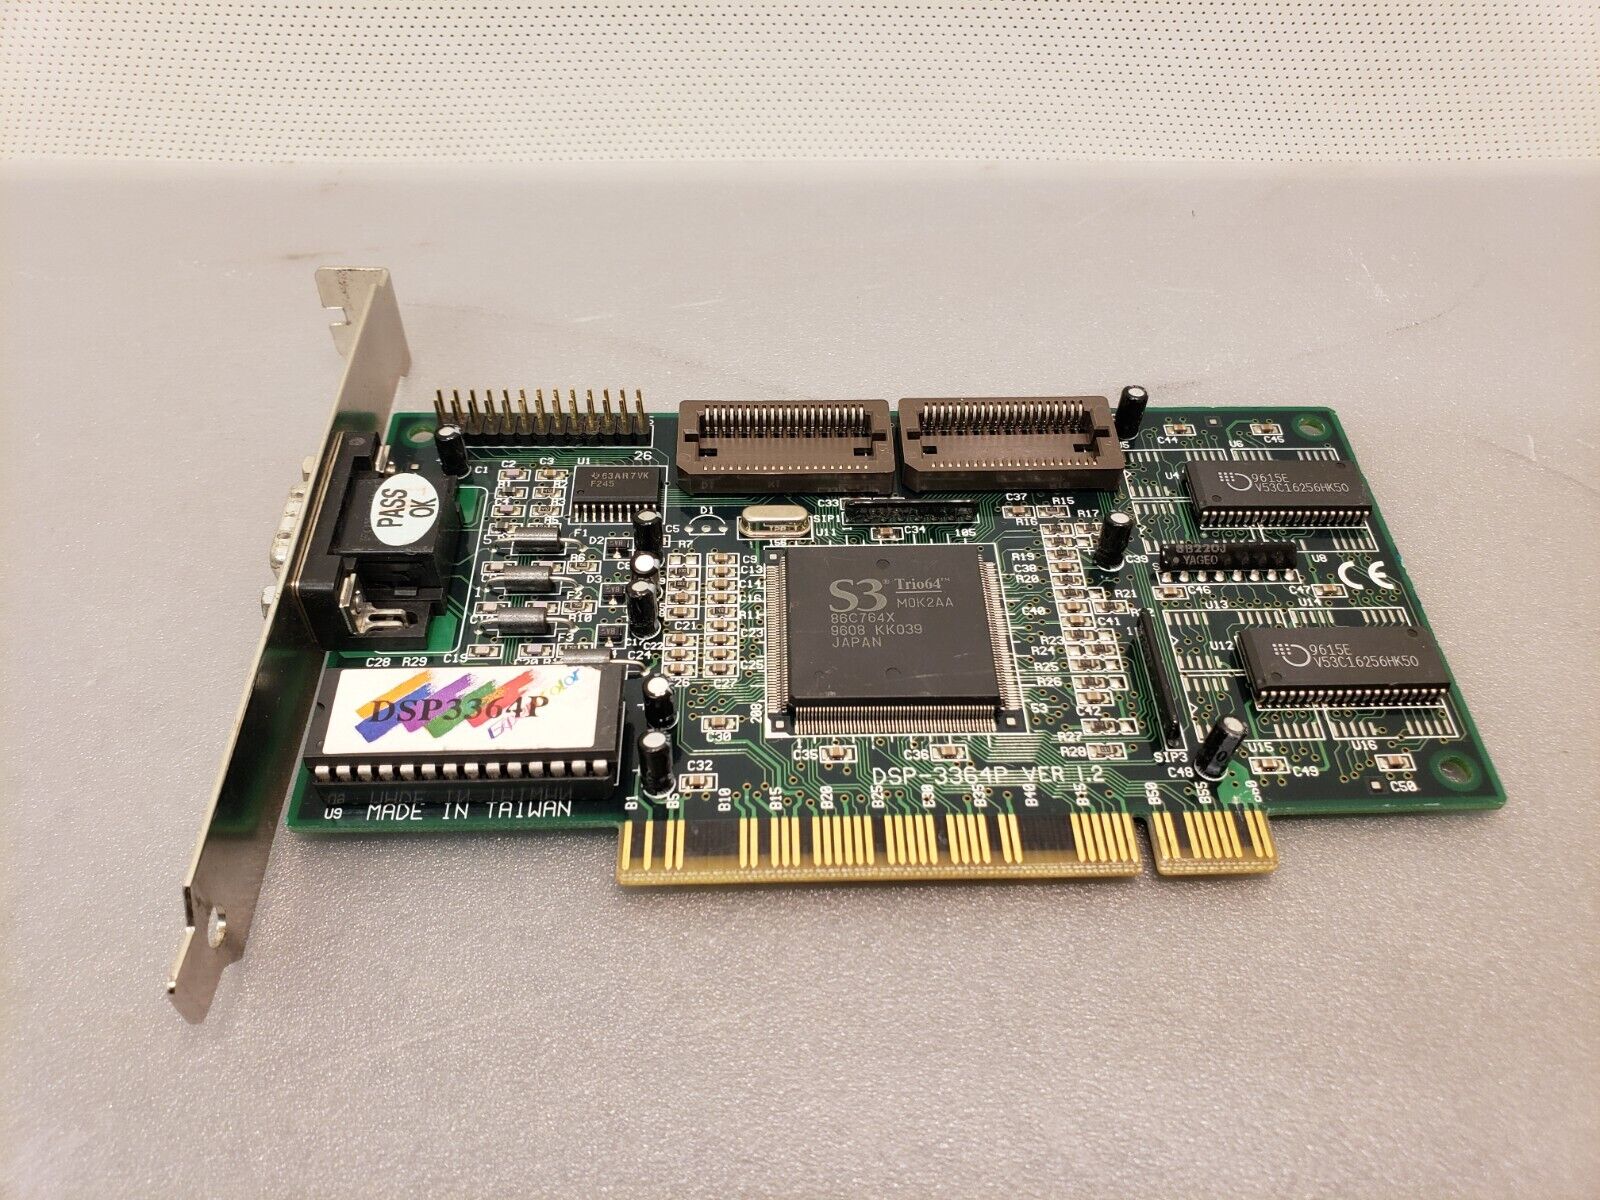 Vintage ExpertColor S3 Trio64 DSP-3364P PCI VGA 1MB Video Graphics Card Tested